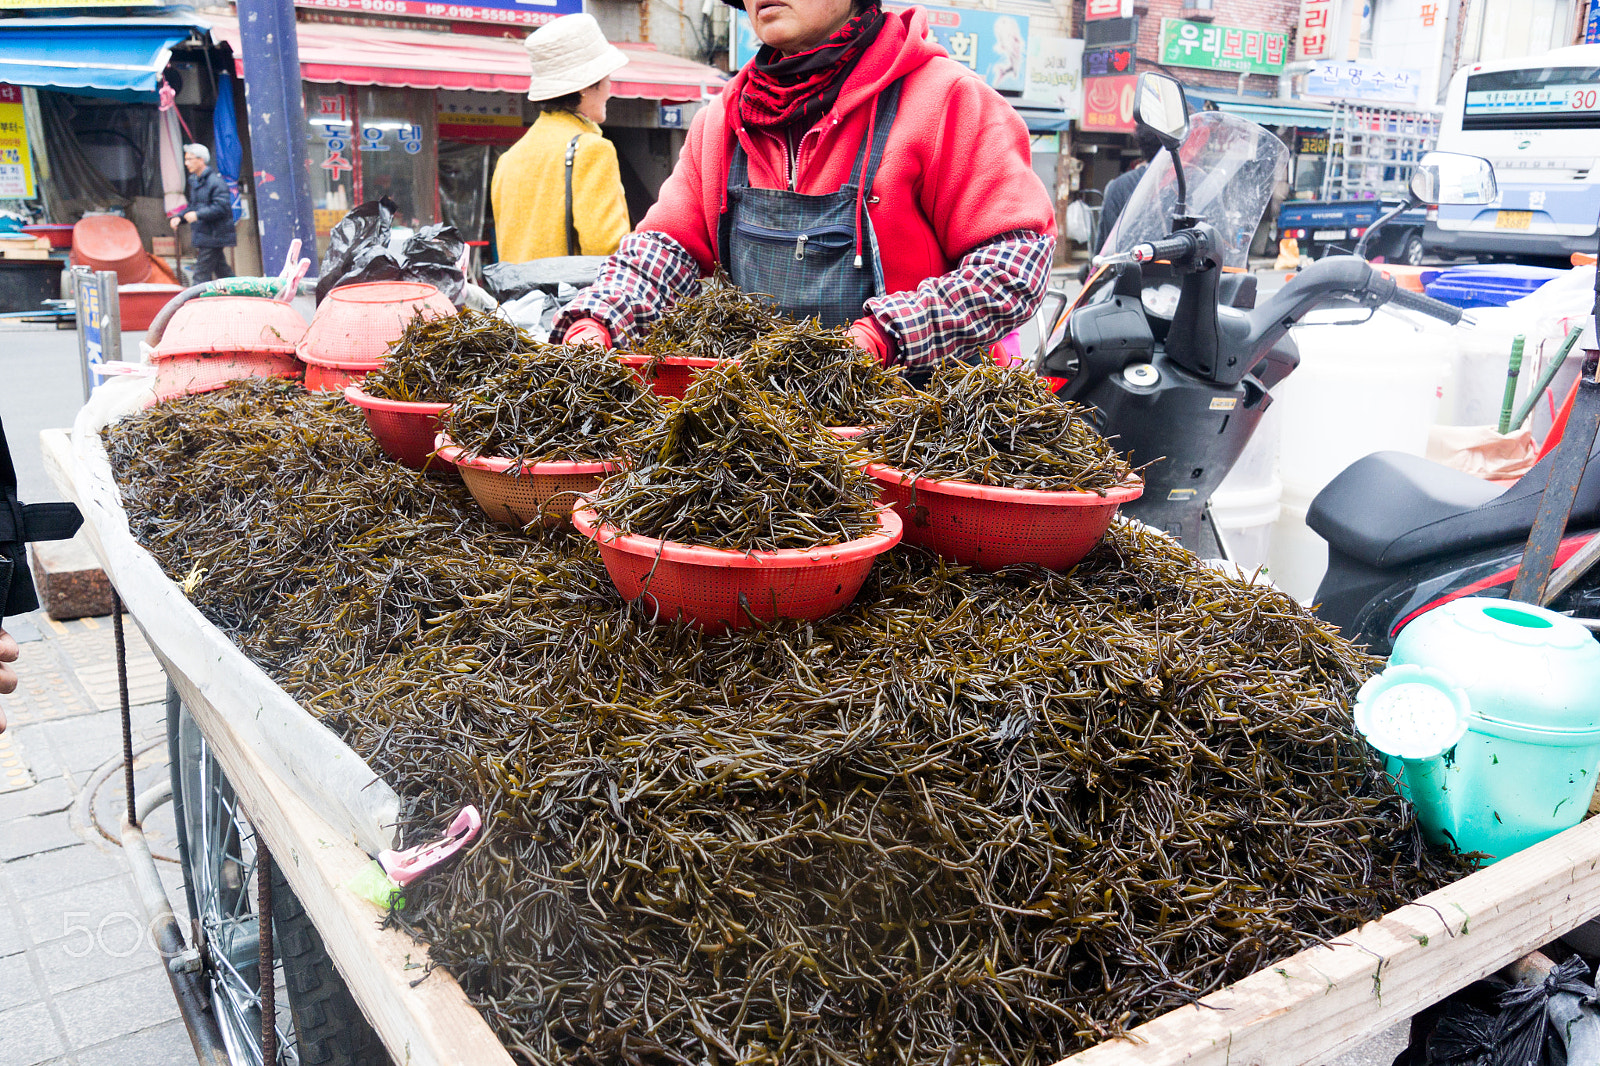 Nikon 1 AW1 sample photo. A woman sell seaweed on a cart in seafood market photography